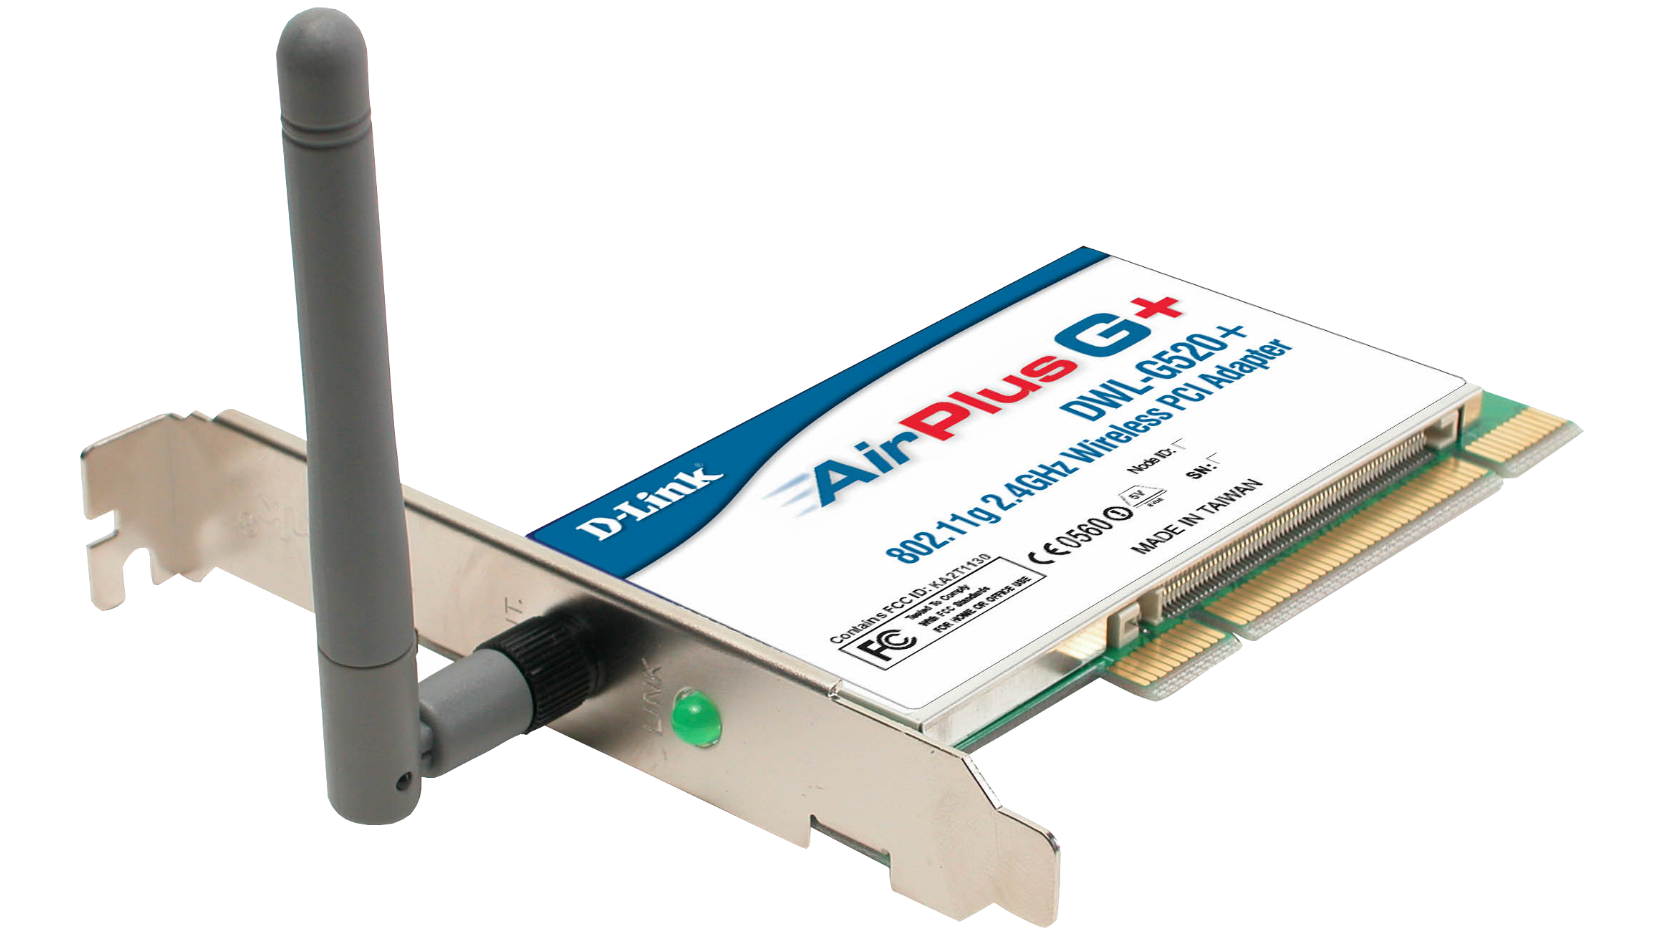 awlh6070 airlink101 wireless adapter windows 7